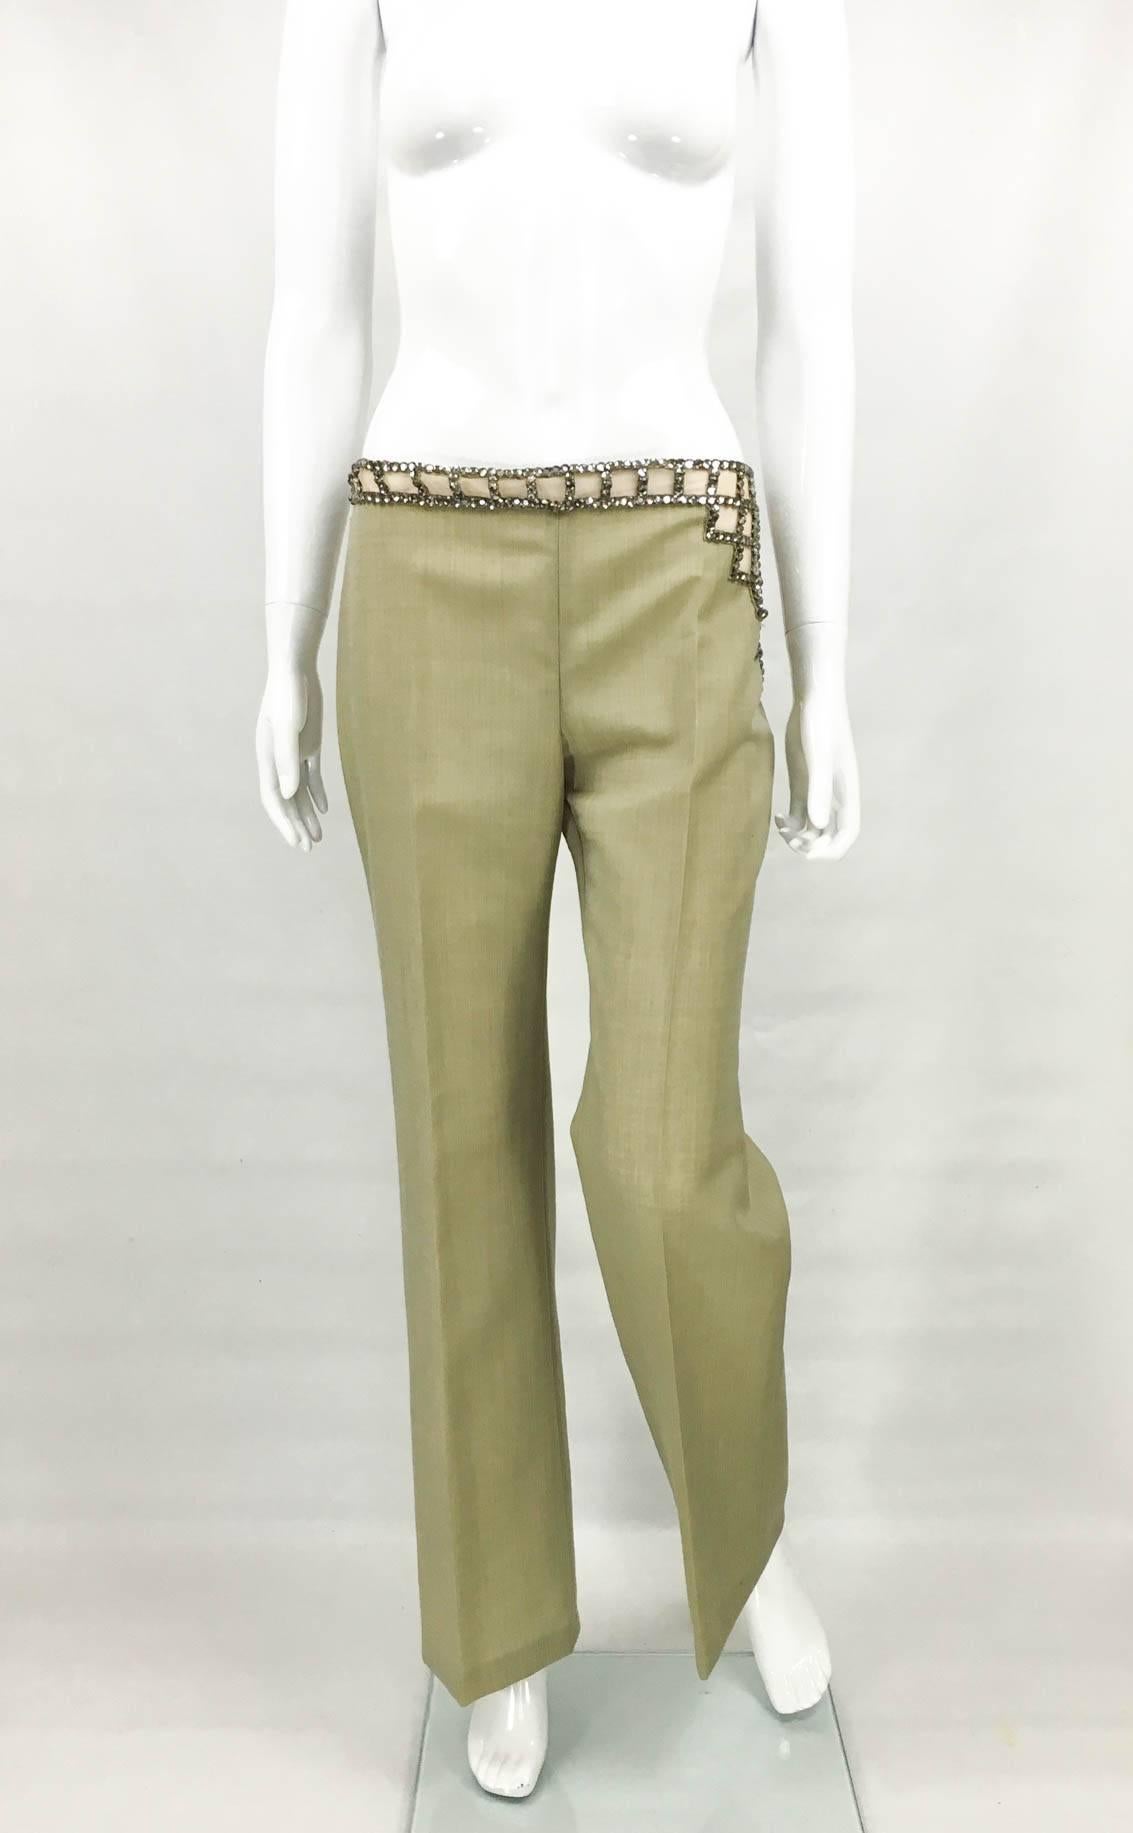 Vintage Chloe Khaki Crystal Embellished Trousers. These fabulous pair of trousers by Chloe date back from the 1990s. In excellent condition, it features a geometric paste/rhinestone embellishment around the waist and going down in a pyramid shape on